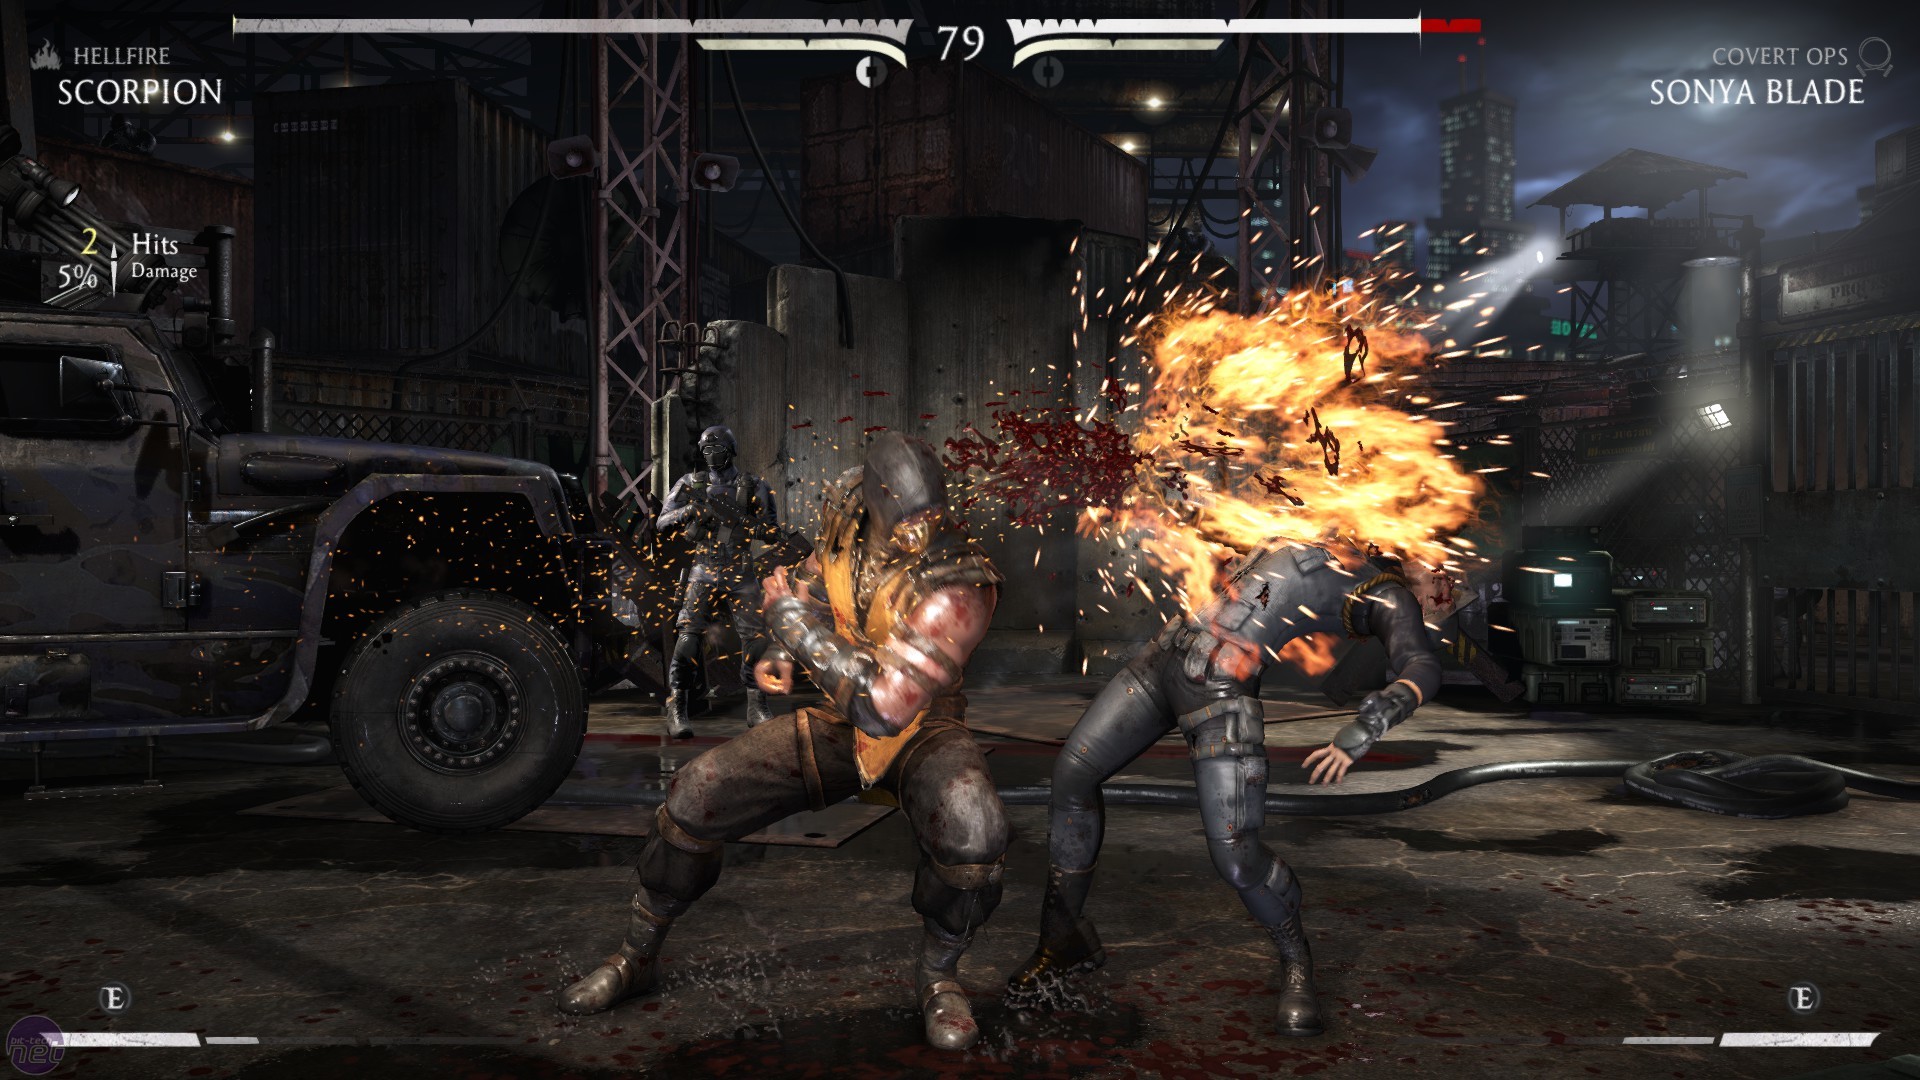 Mortal Kombat X Review: Microtransactions Ruin an Otherwise Flawless Victory